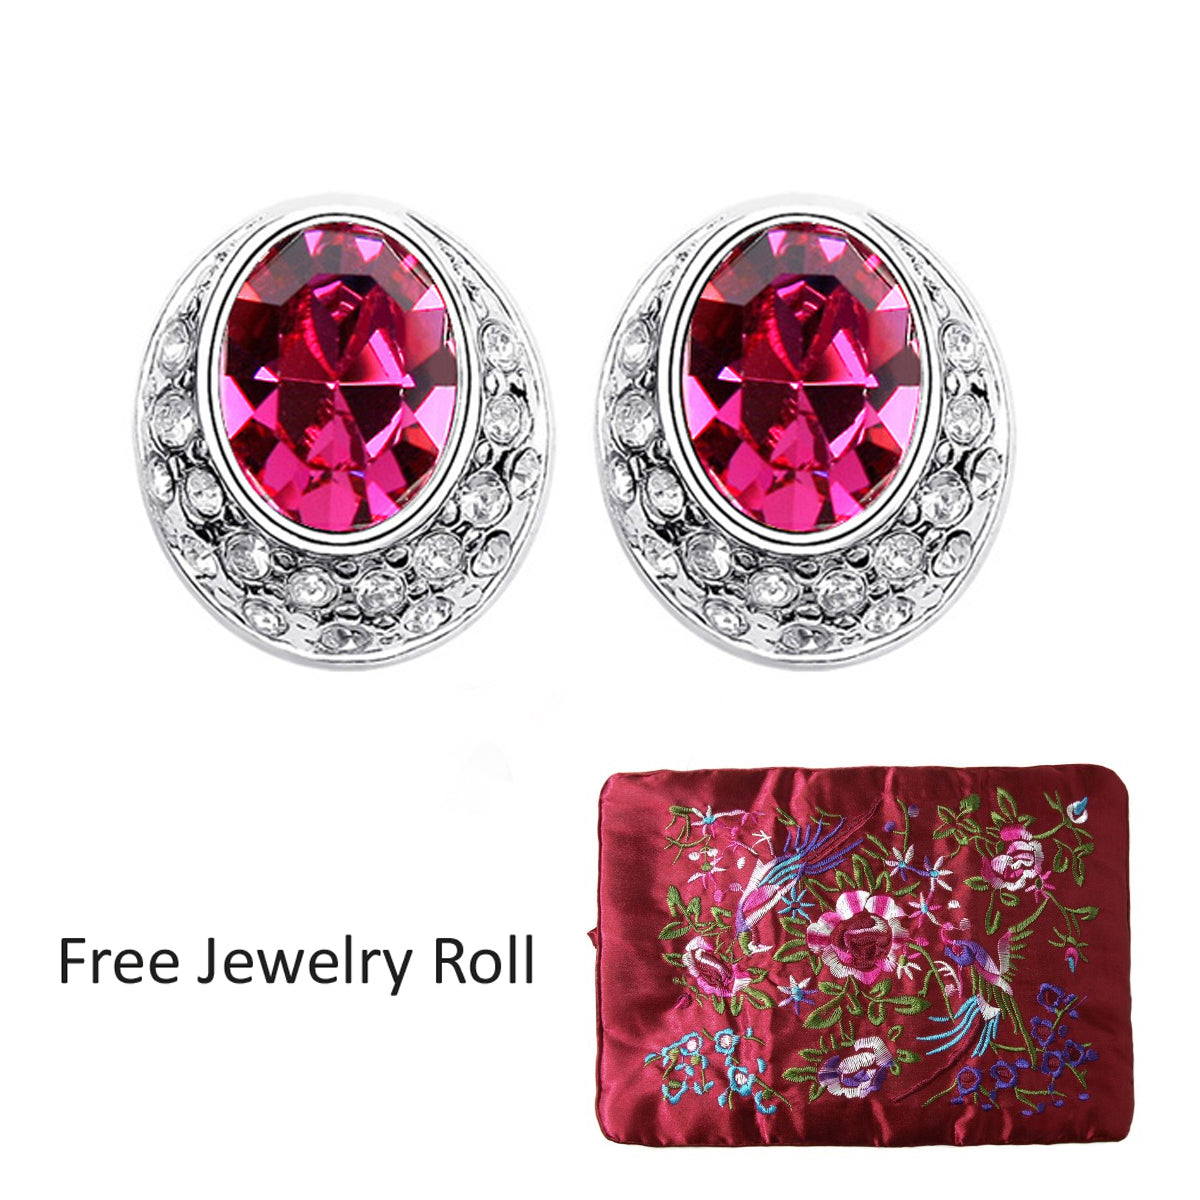 Magenta Crystal Earrings + Large Burgundy Silk Embroidered Jewelry Roll